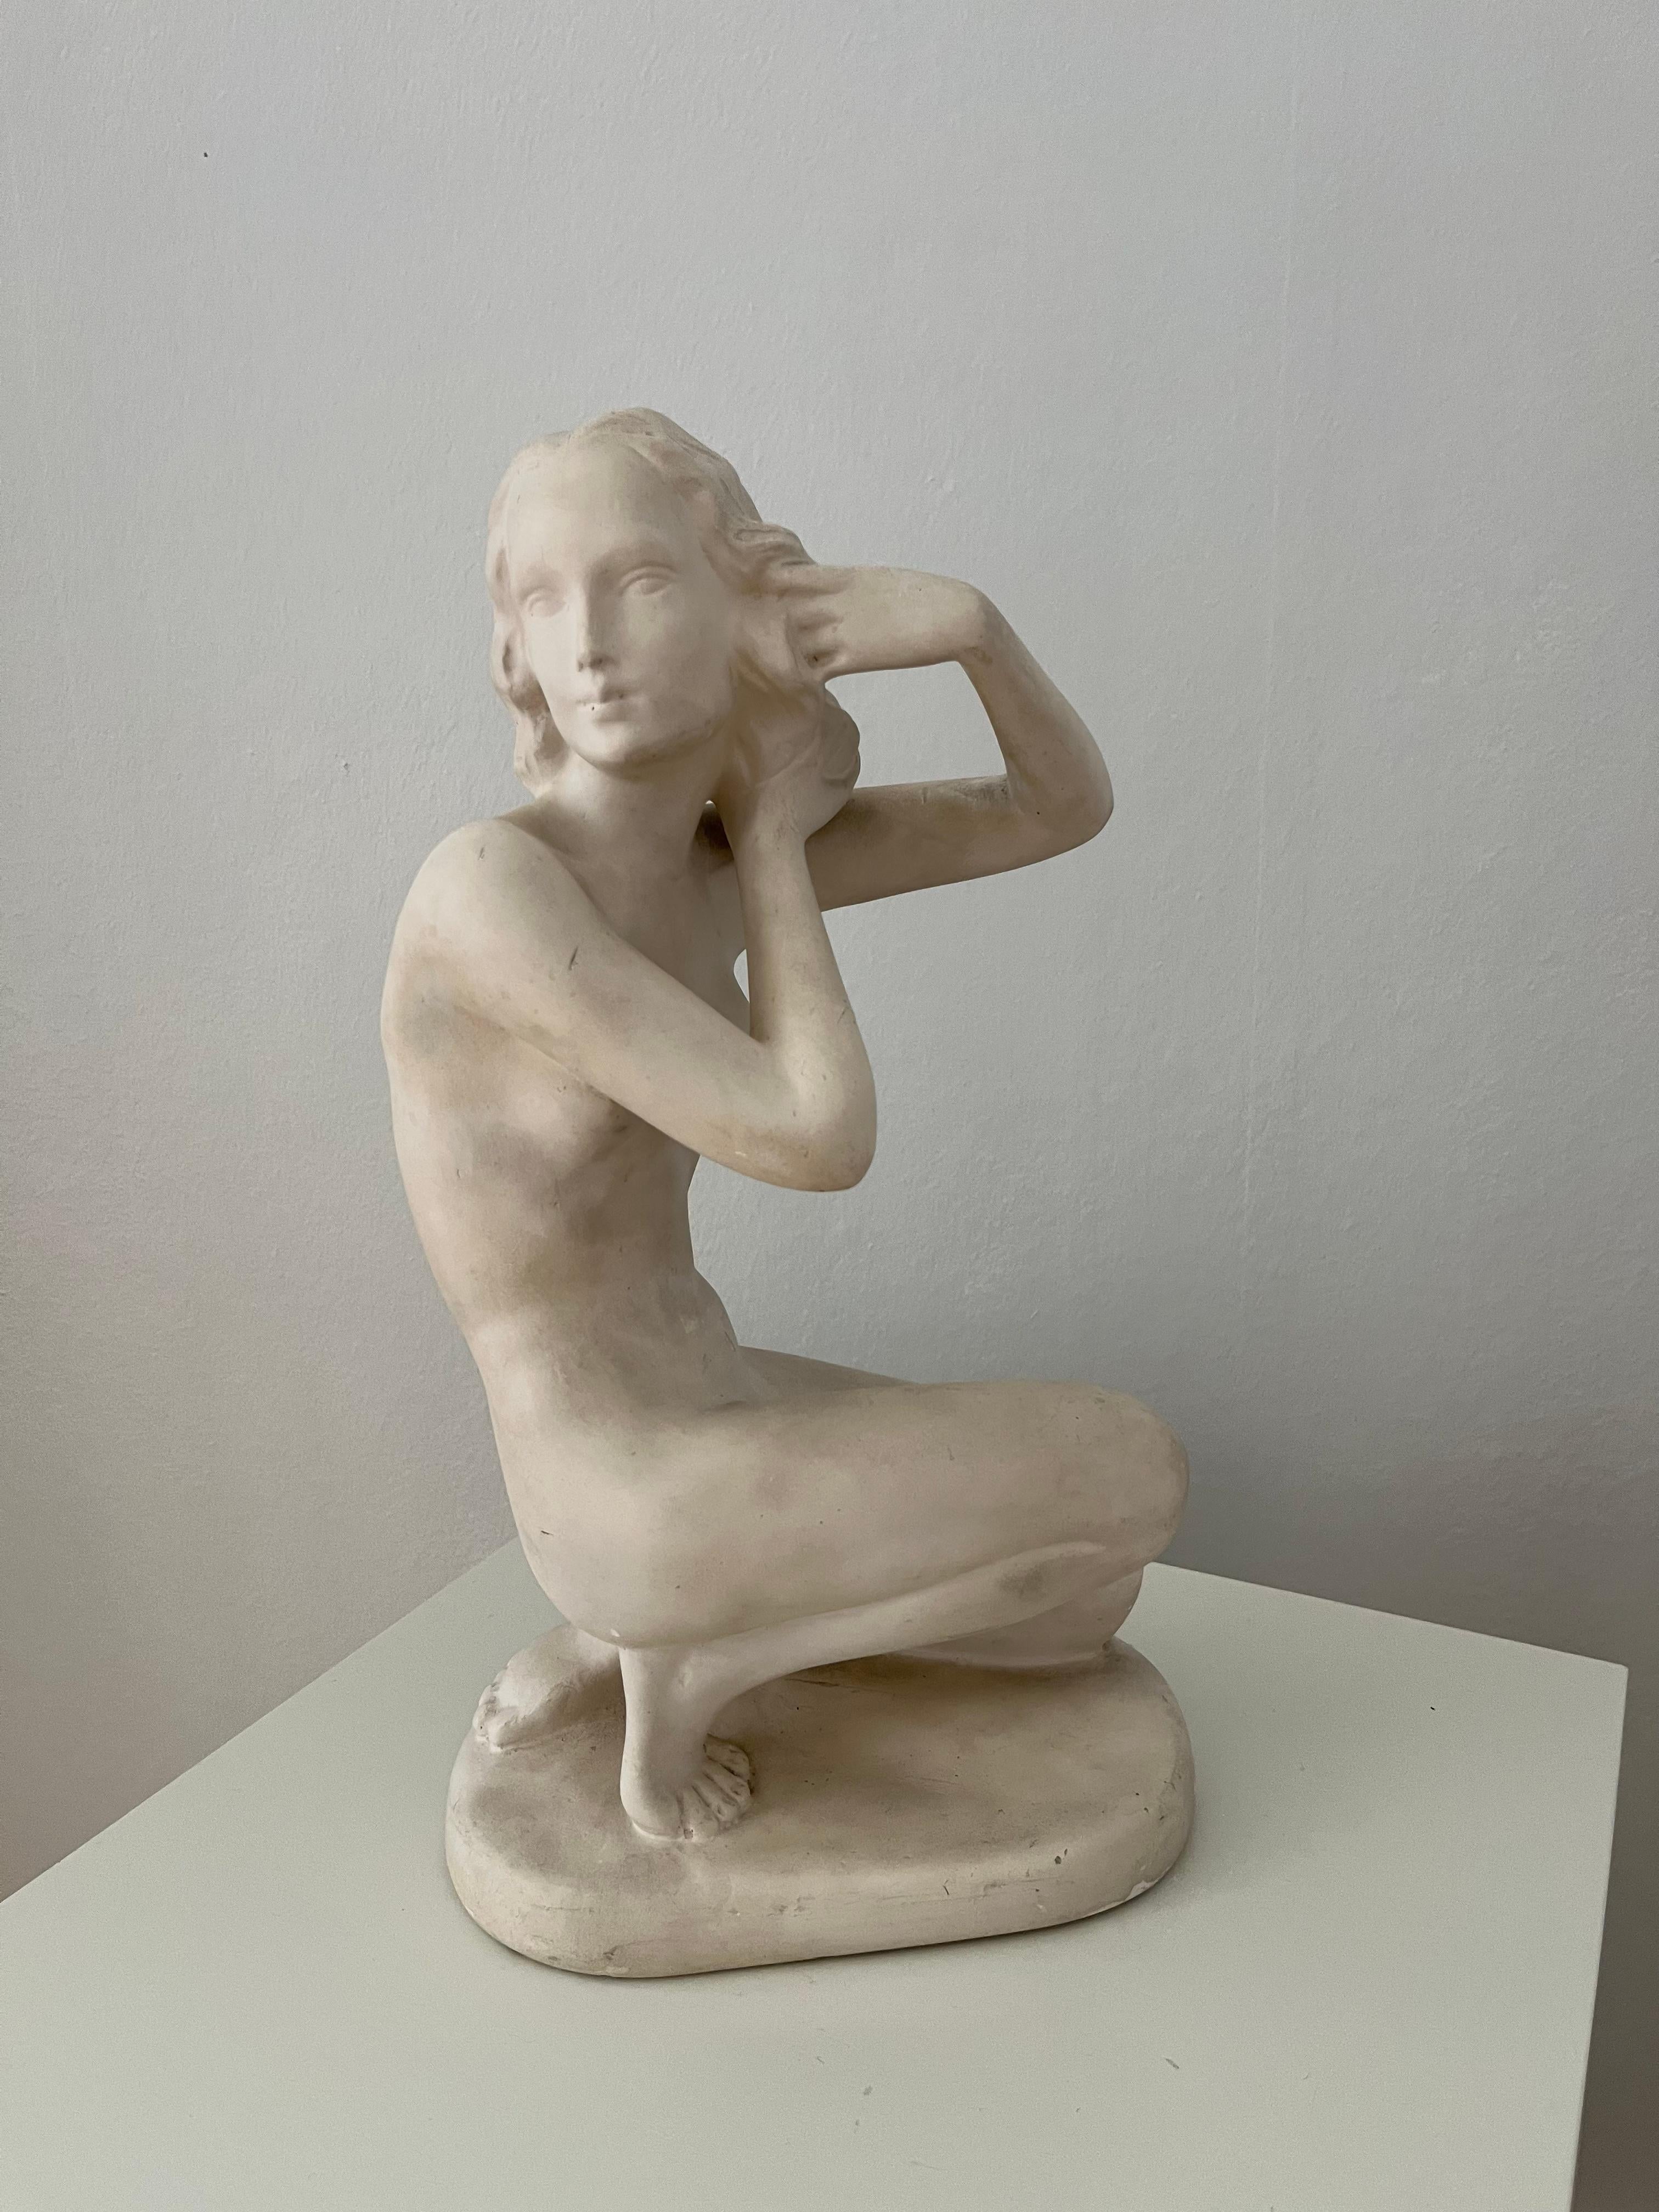 Handmade figurine of a sitting woman in matte white plaster. Made in Denmark in 1940s, signed '737'. 
Very decorative piece with signs of wear and use, scratches and chips – overall patinated, the matte surface makes it more vulnerable for i.e. dust